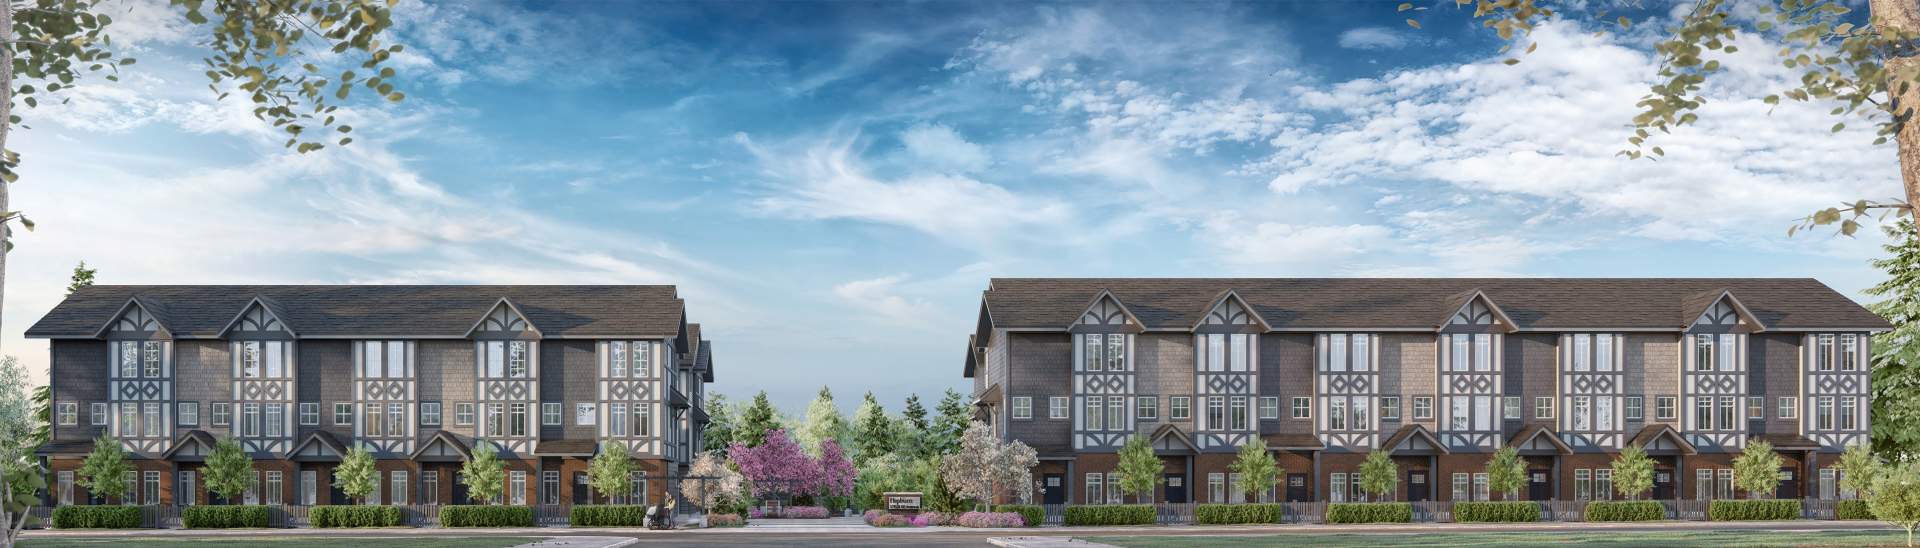 A collection of 25 family-size townhomes coming soon to Cloverdale Town Centre.